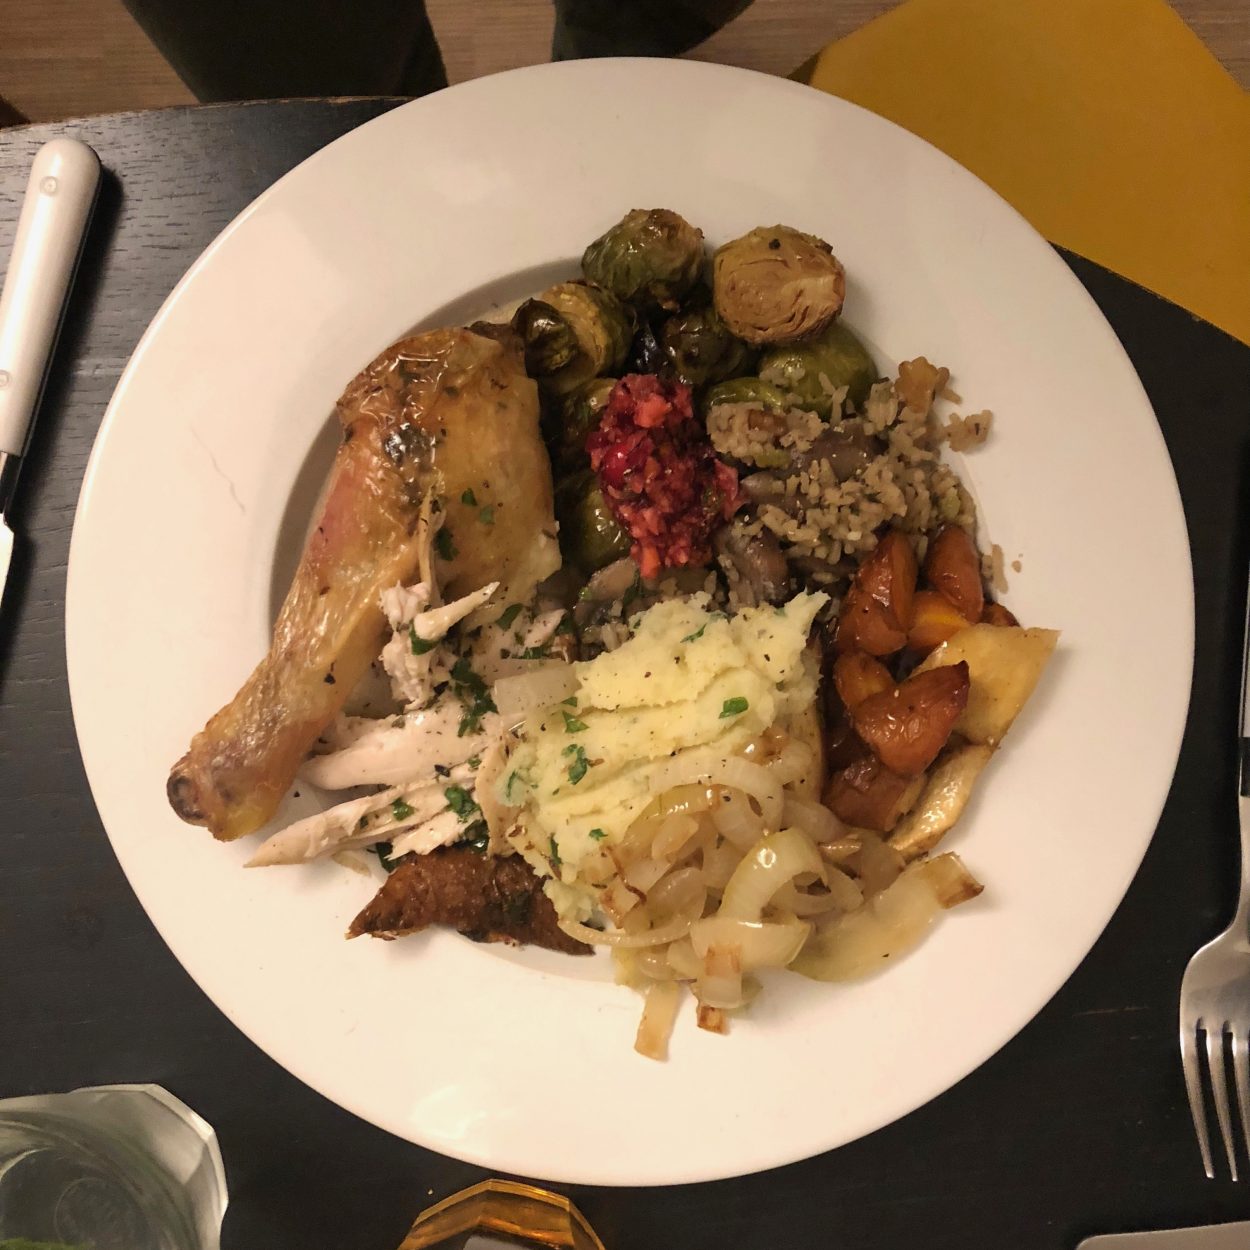 Plate of food, Thanksgiving 2018